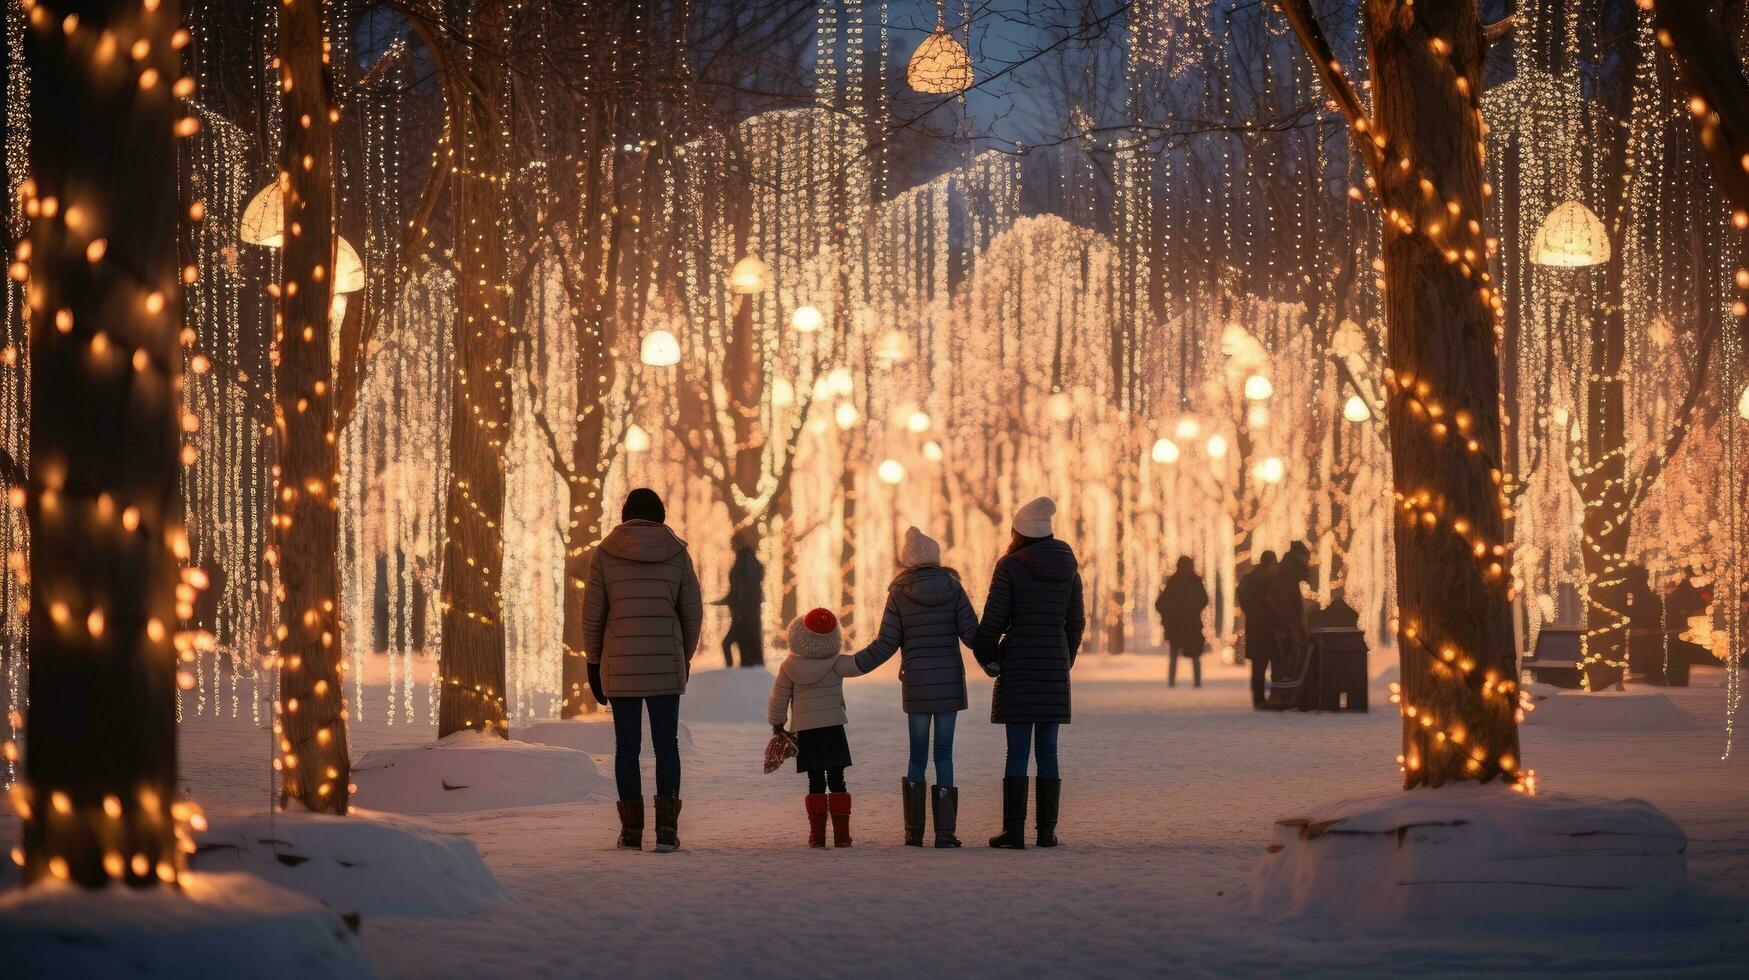 Family, parents and children in a beautiful winter garden with Christmas lights on the trees in the evening photo